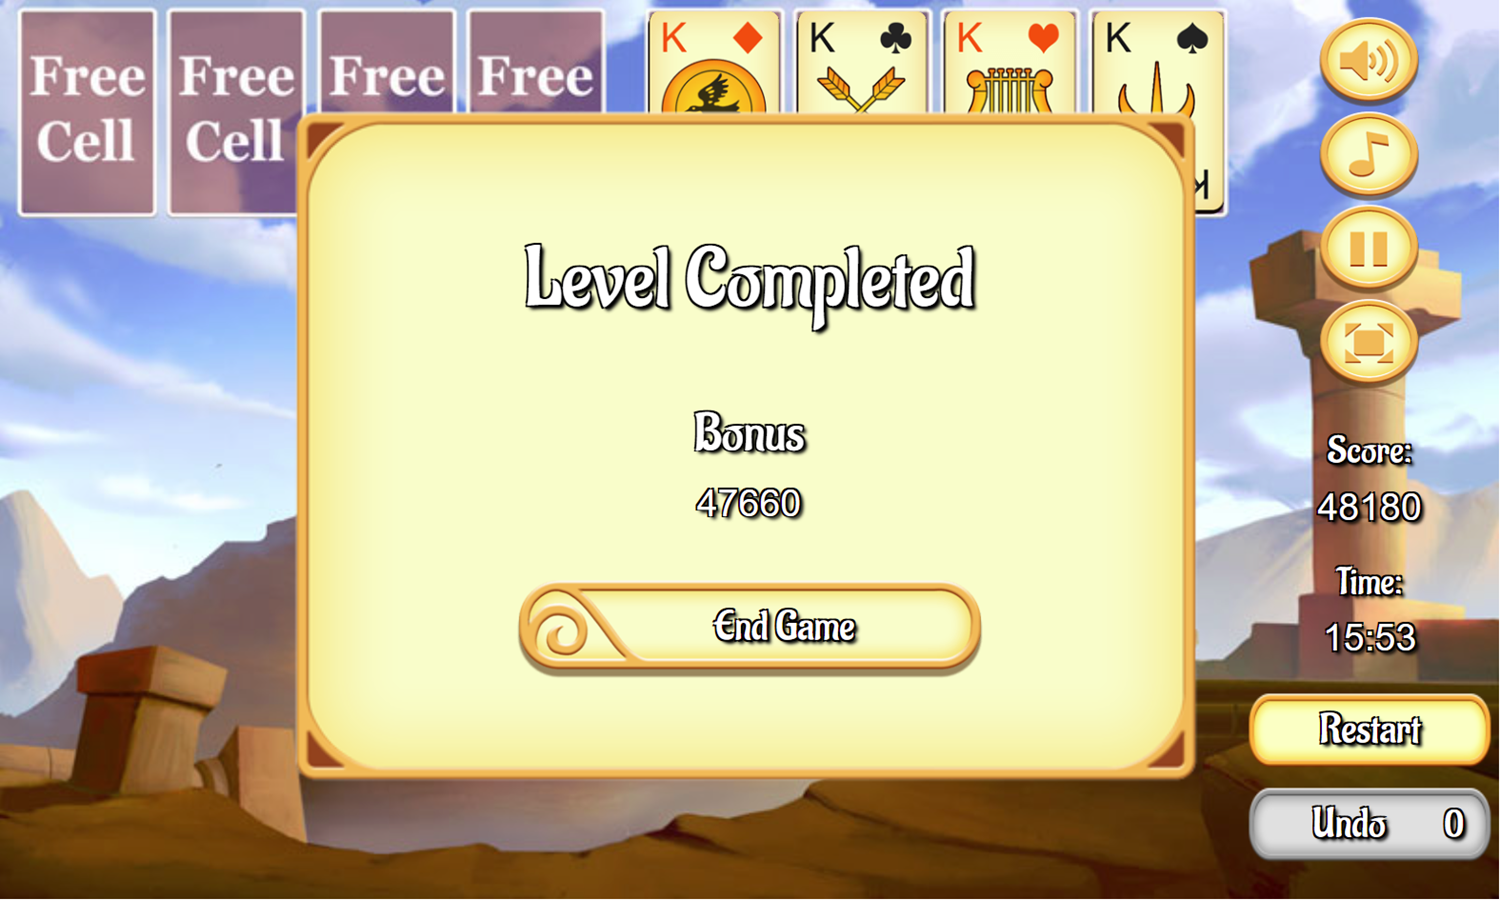 Medieval Freecell Game Completed Screenshot.